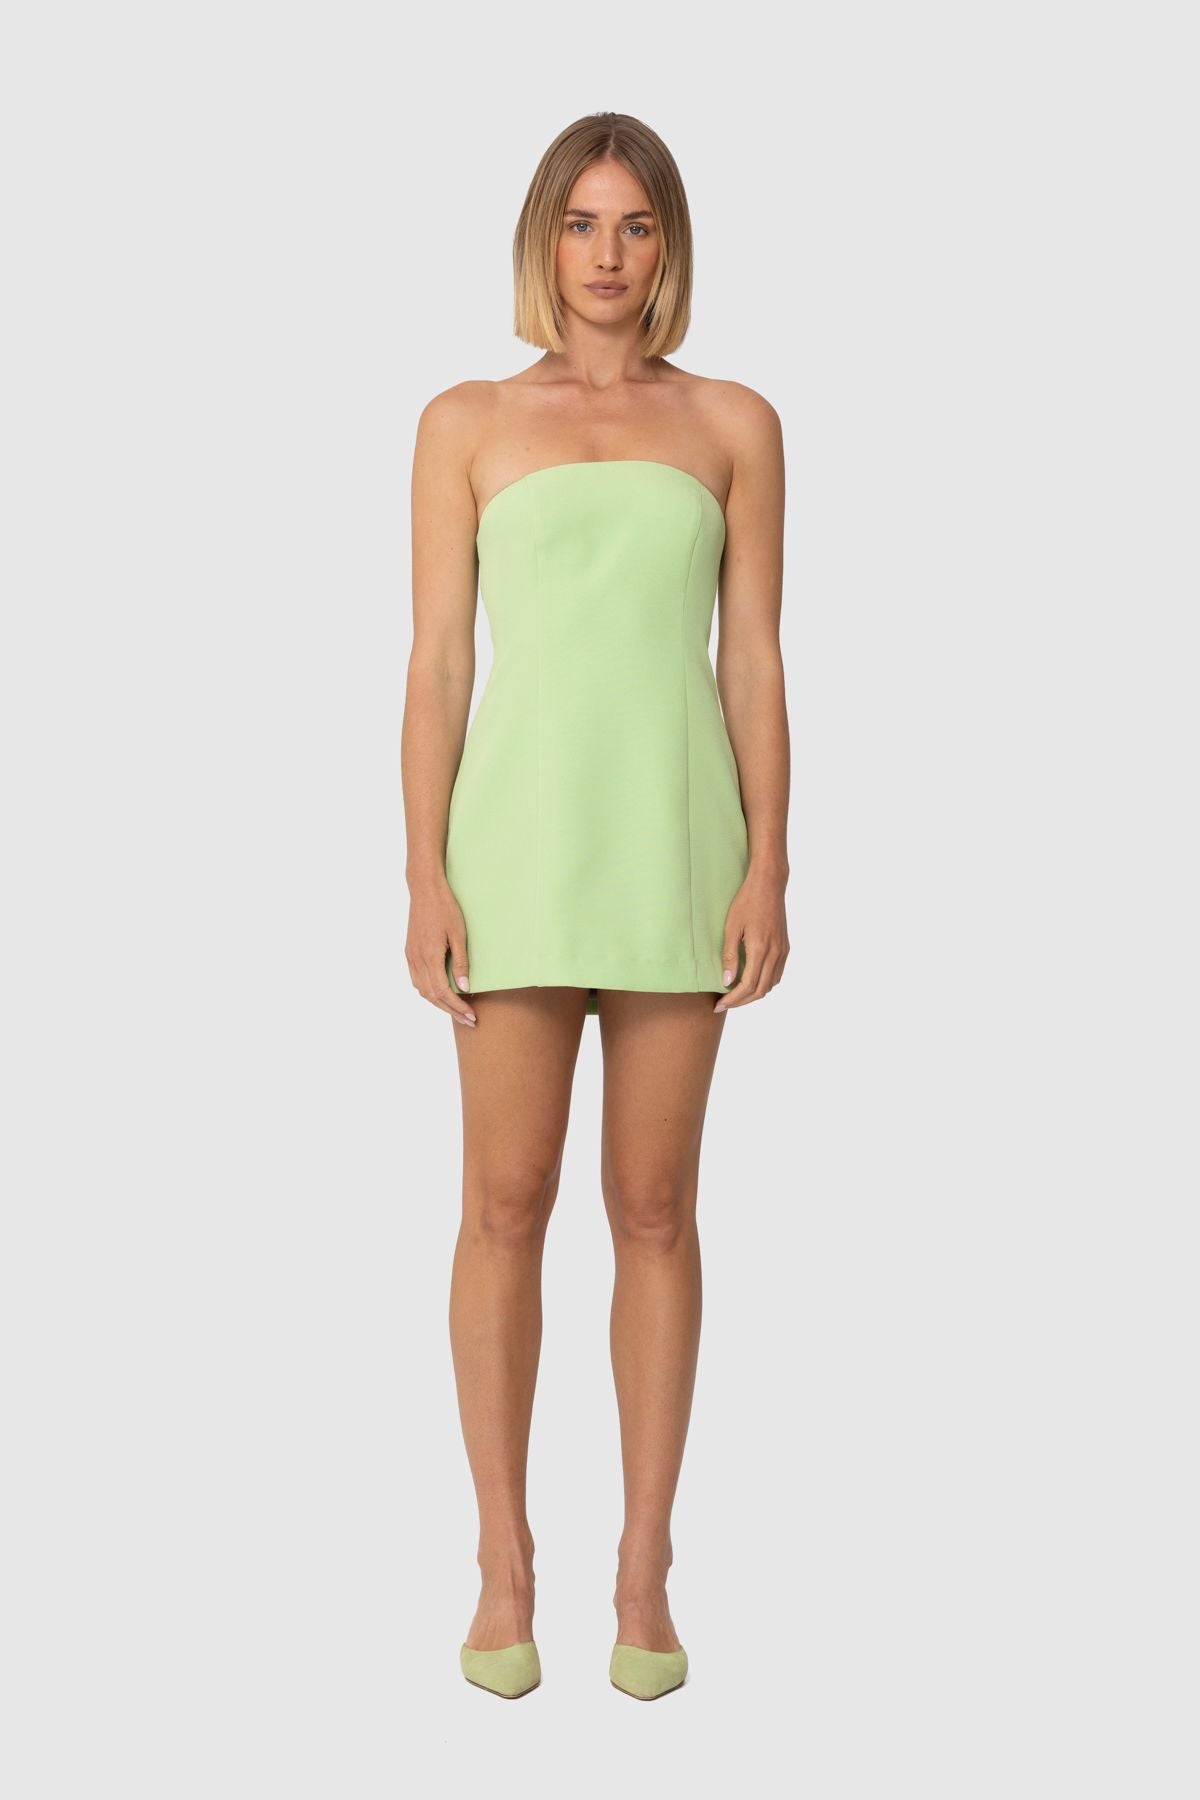 Ravello Mini Dress in Mint by The Wolf Gang